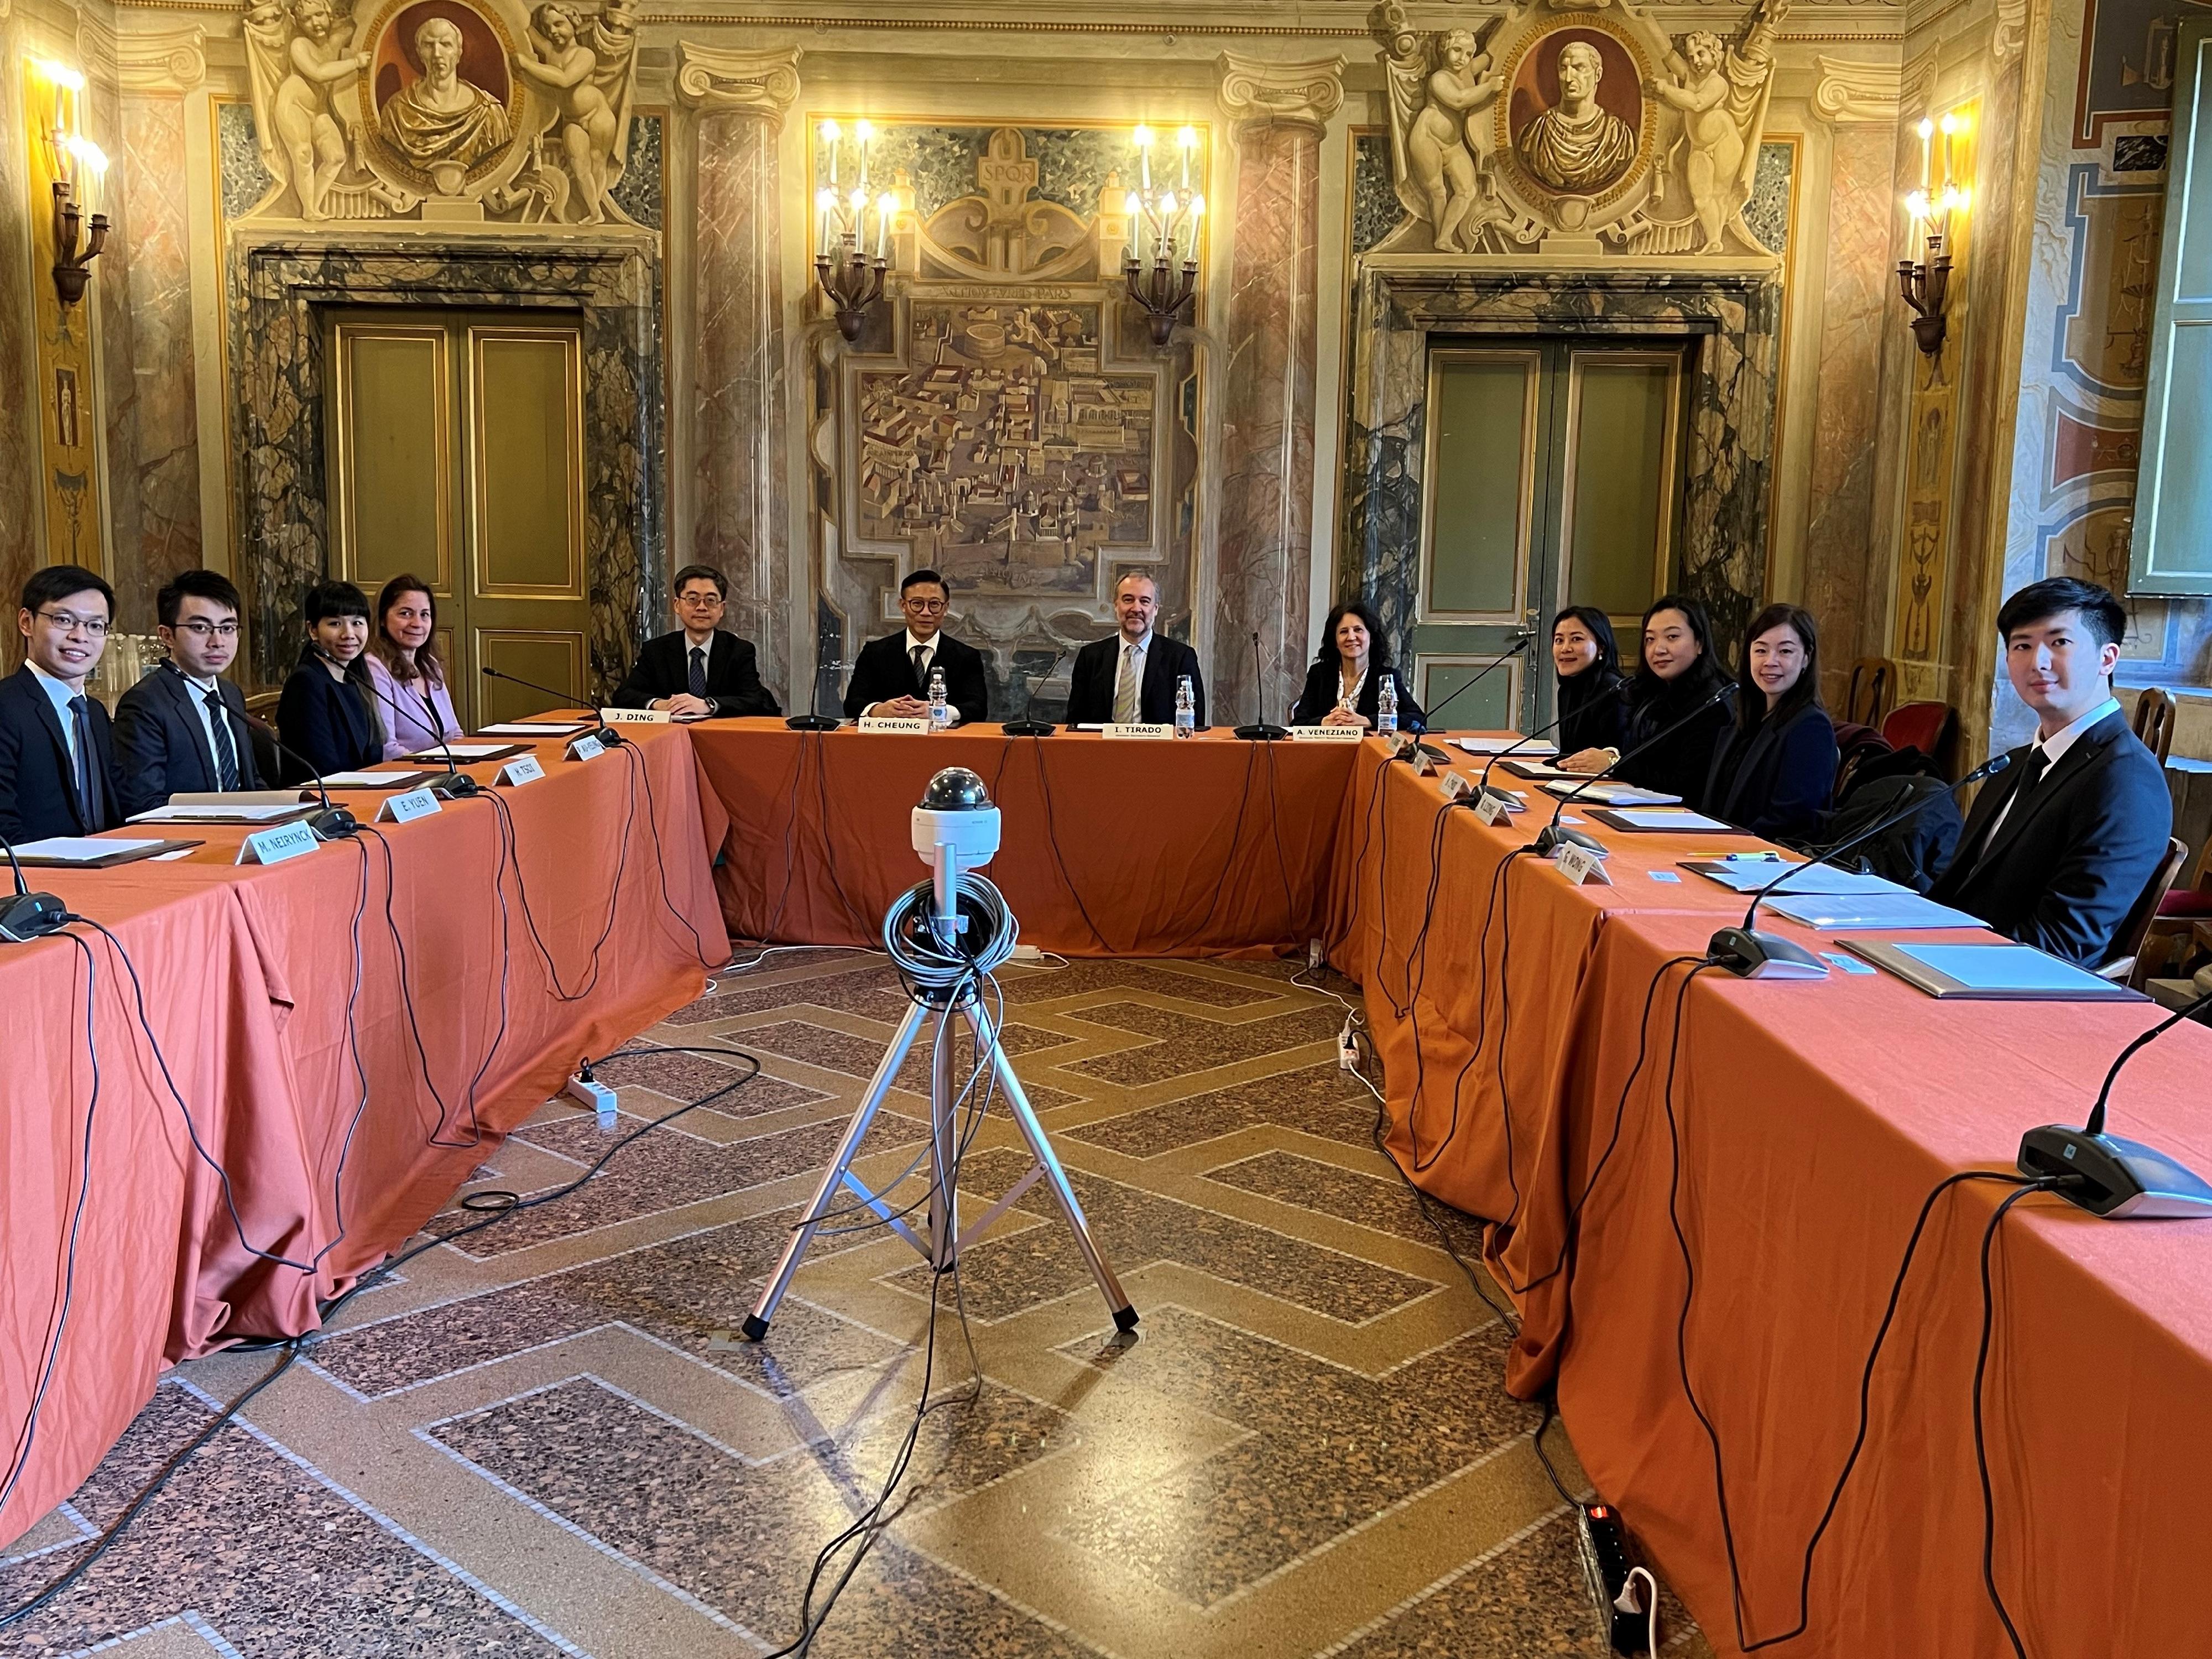 The Deputy Secretary for Justice, Mr Cheung Kwok-kwan (sixth left), met with the Secretary-General of the International Institute for the Unification of Private Law (UNIDROIT), Professor Ignacio Tirado (sixth right), and UNIDROIT's management in Rome, Italy, on March 6 (Rome time). Photo shows both parties before the meeting.